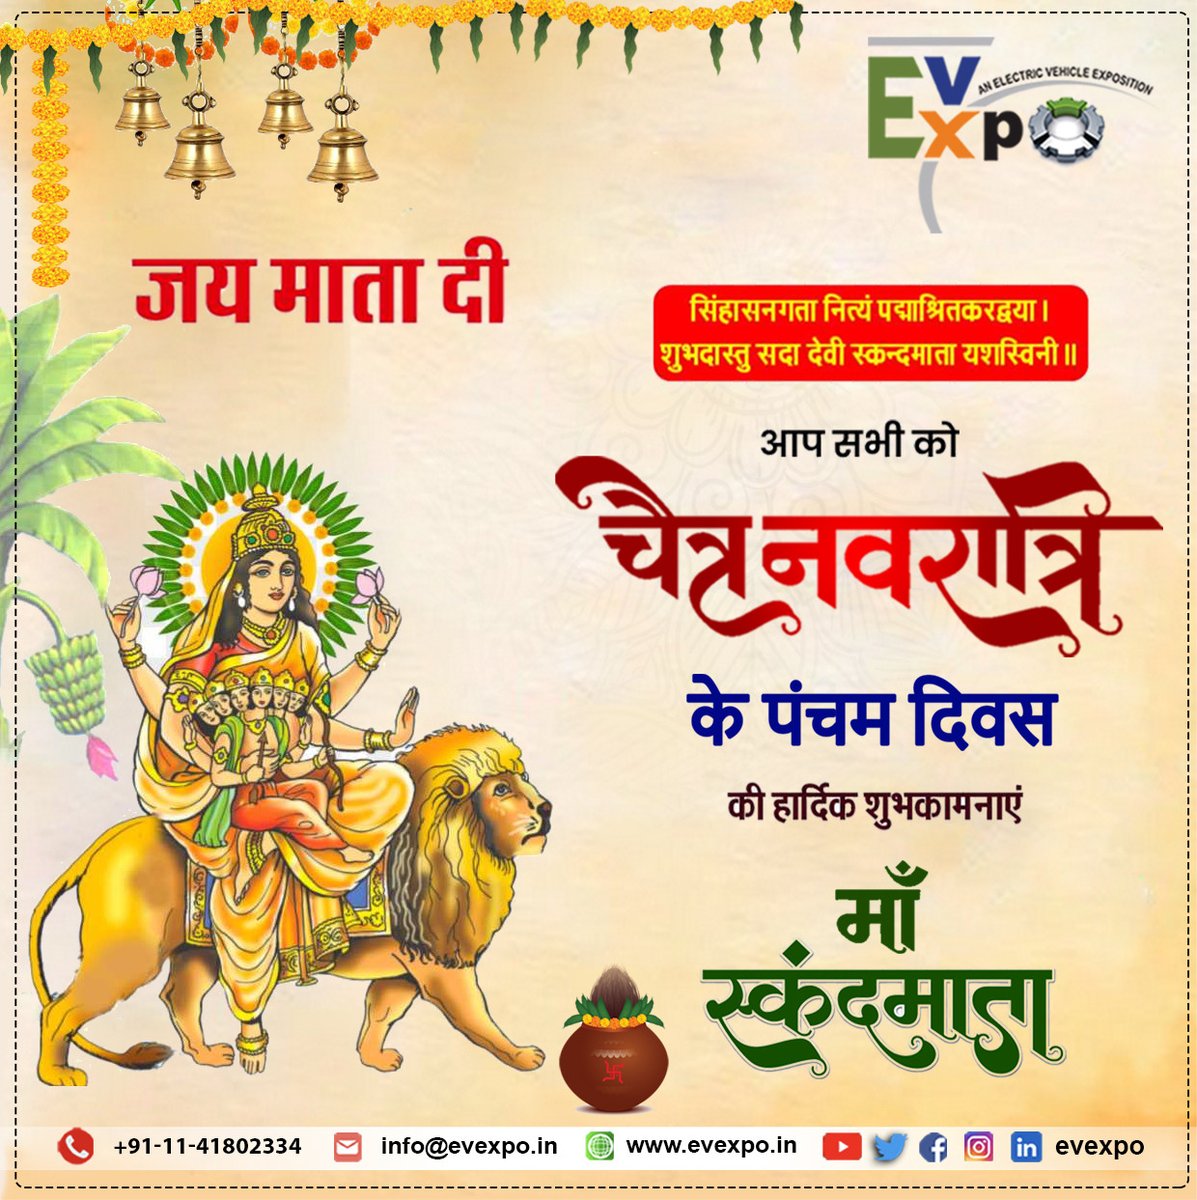 'Happy 5th Day of Navratri from EvExpo! 🌟 Embrace the vibrant energy of Goddess Skandamata, the fifth manifestation of NavDurga. At EvExpo, we celebrate her divine presence with electric vibes and sustainable innovations.
 
#NavratriSpecial   #chaitranavratri #ChaitraNavratri